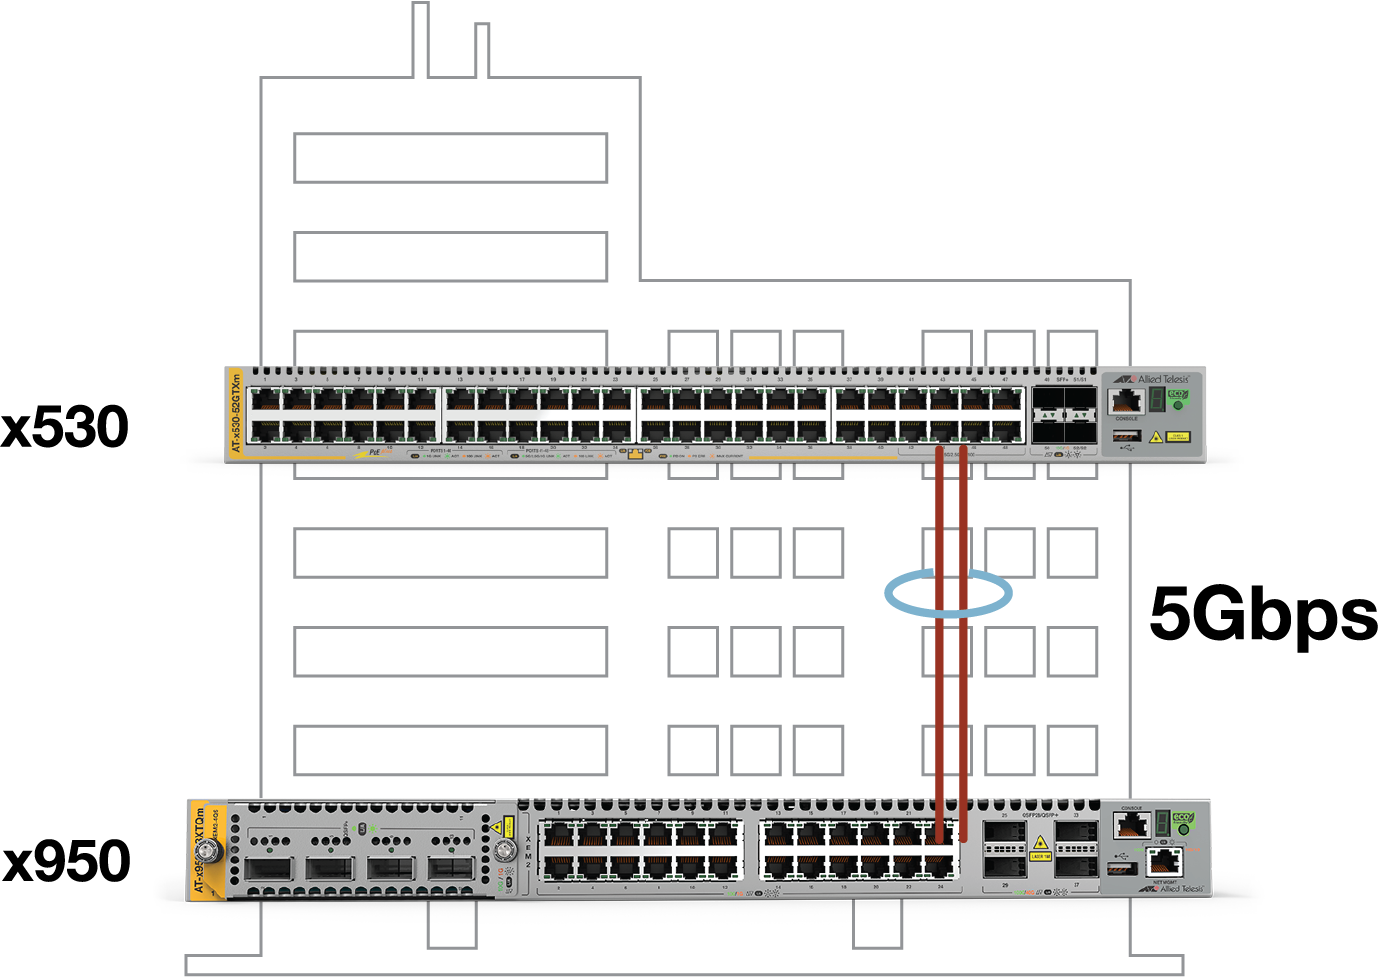 An x950 switch and an x530 switch joined with a multi-Gigabit connection 